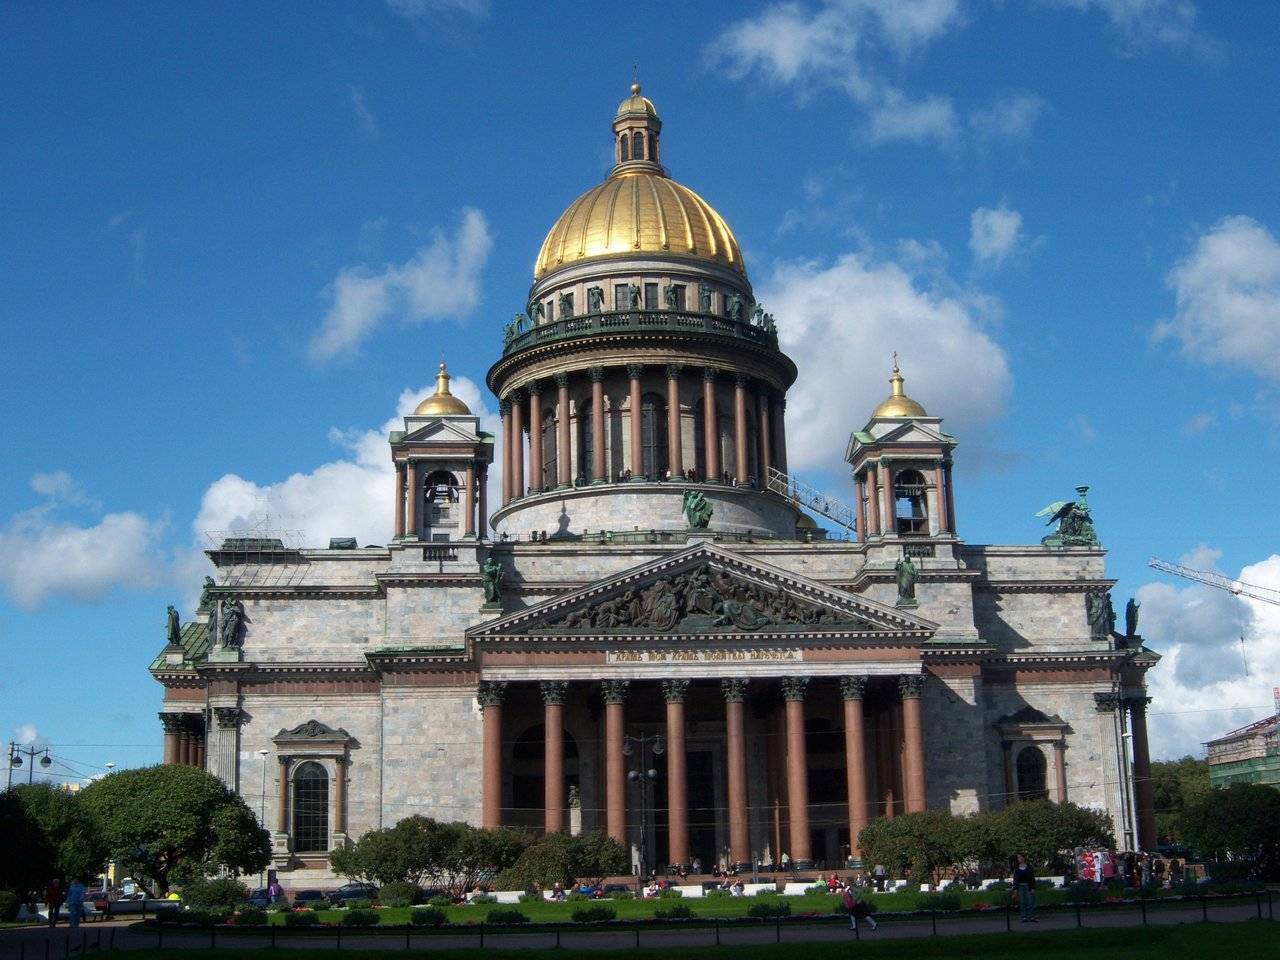 St. Isaac's Cathedral